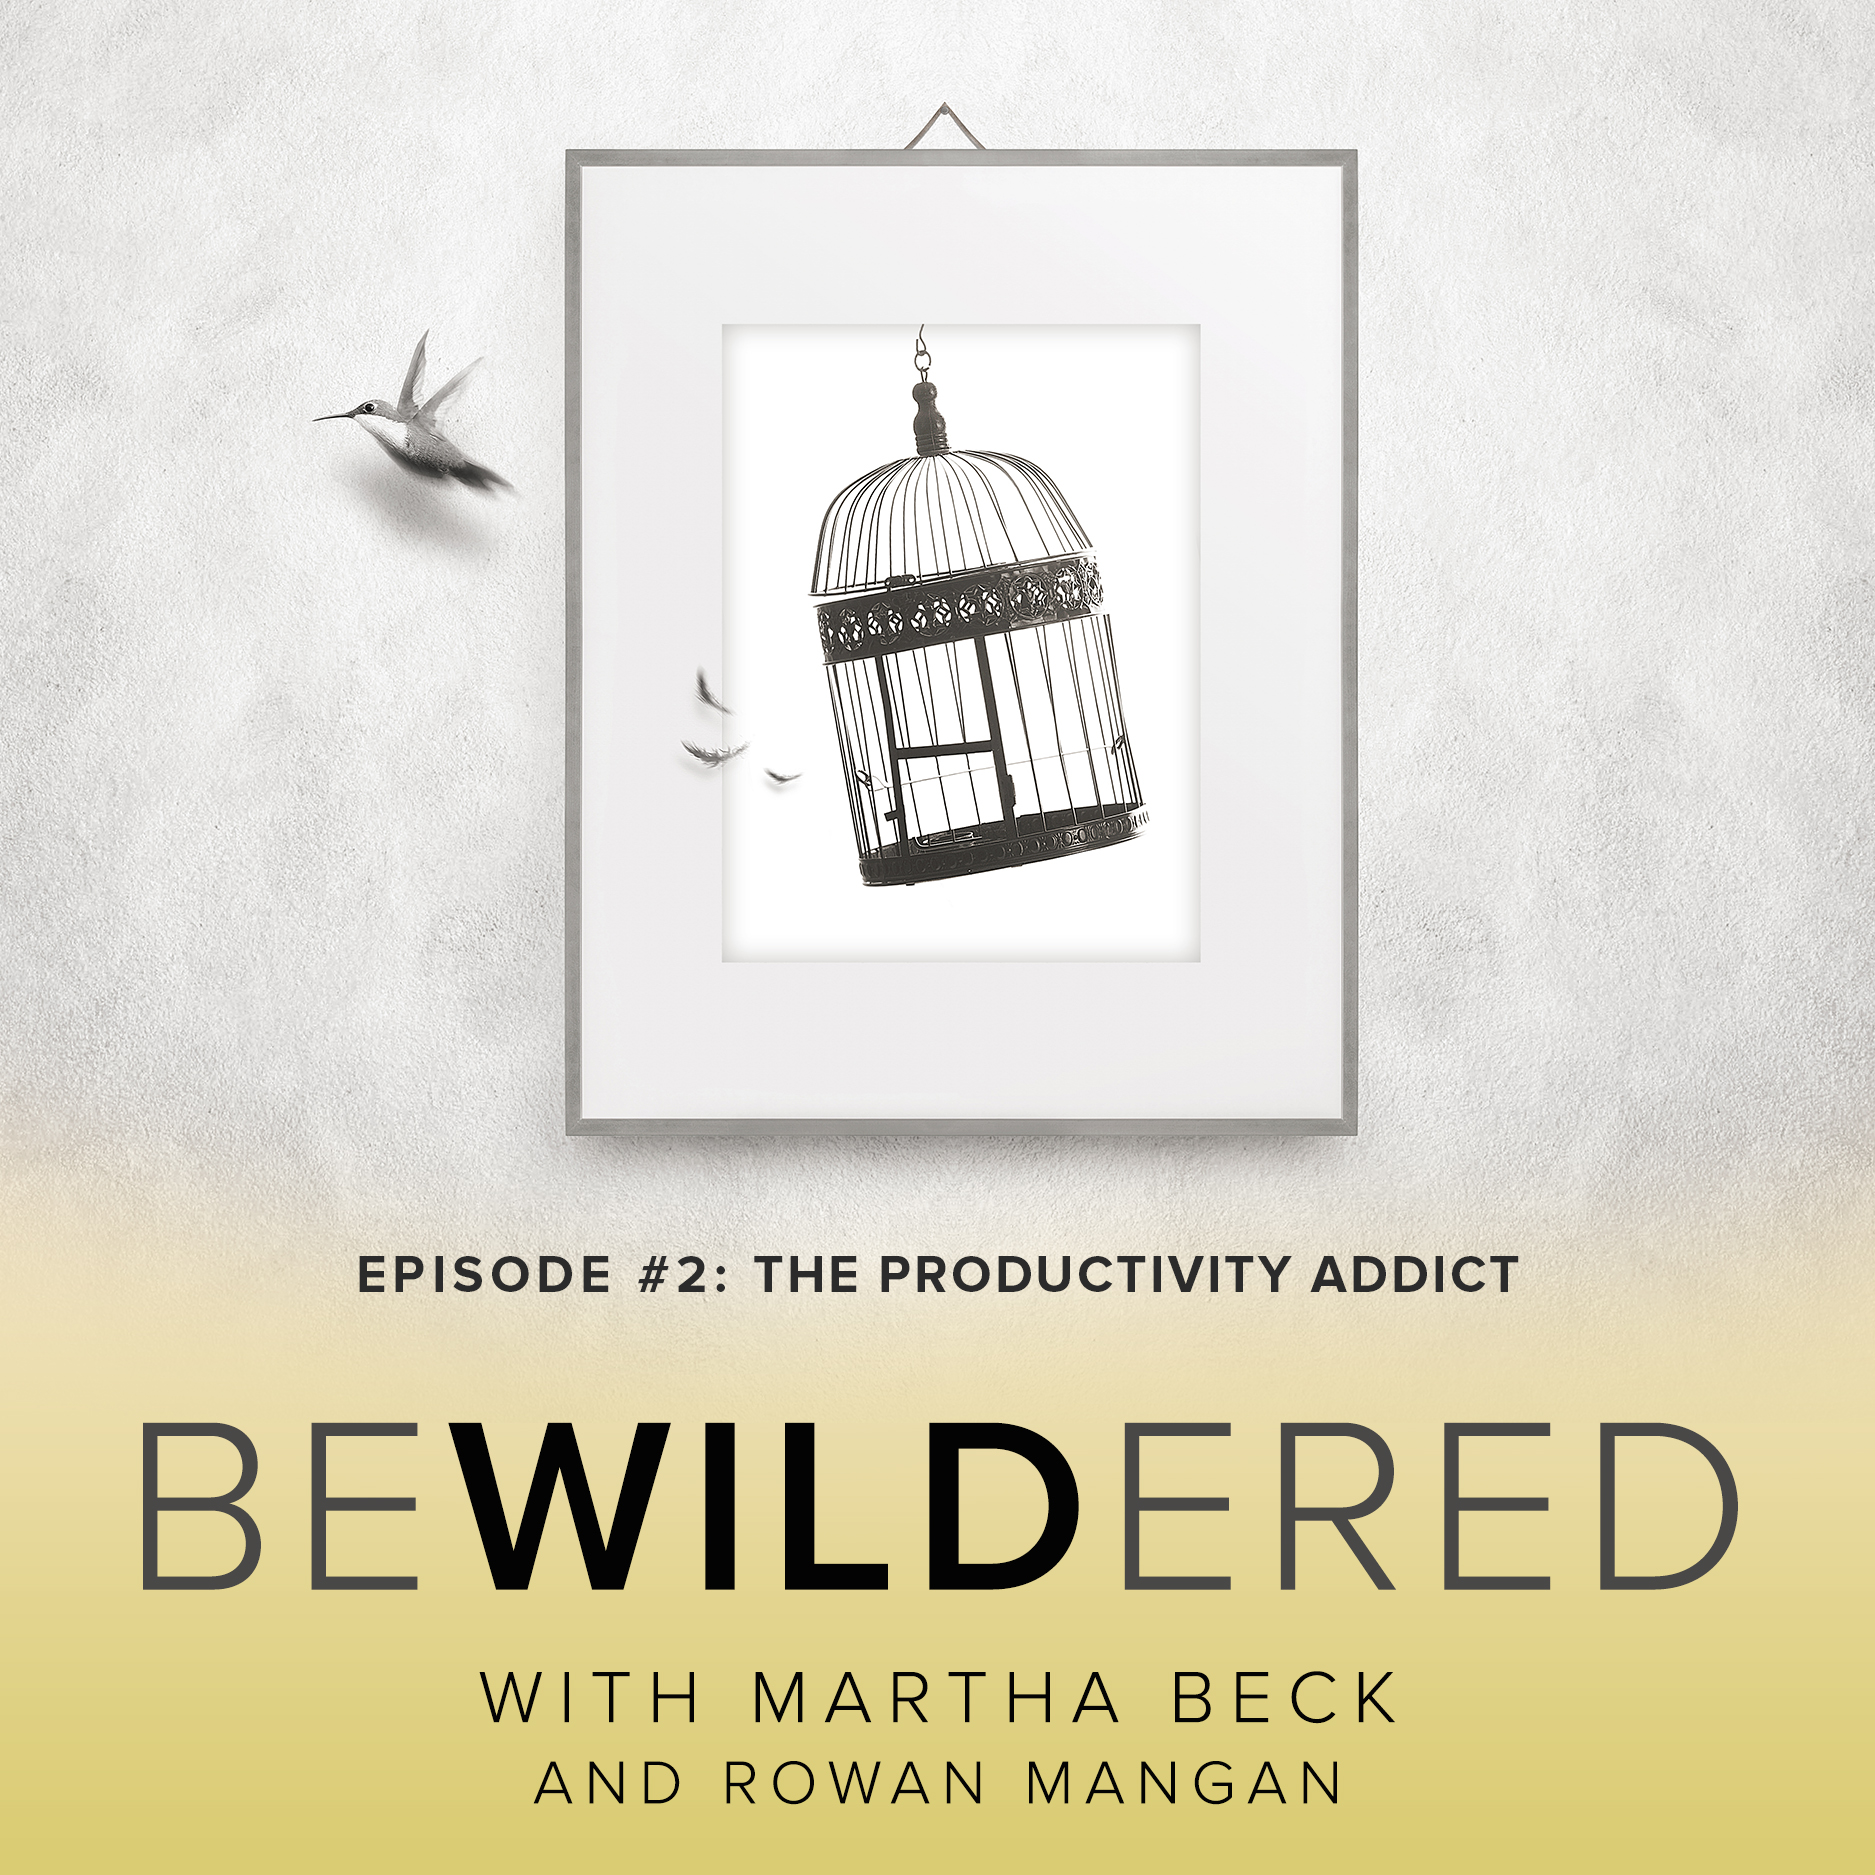 Image for Episode #2 The Productivity Addict for the Bewildered Podcast with Martha Beck and Rowan Mangan